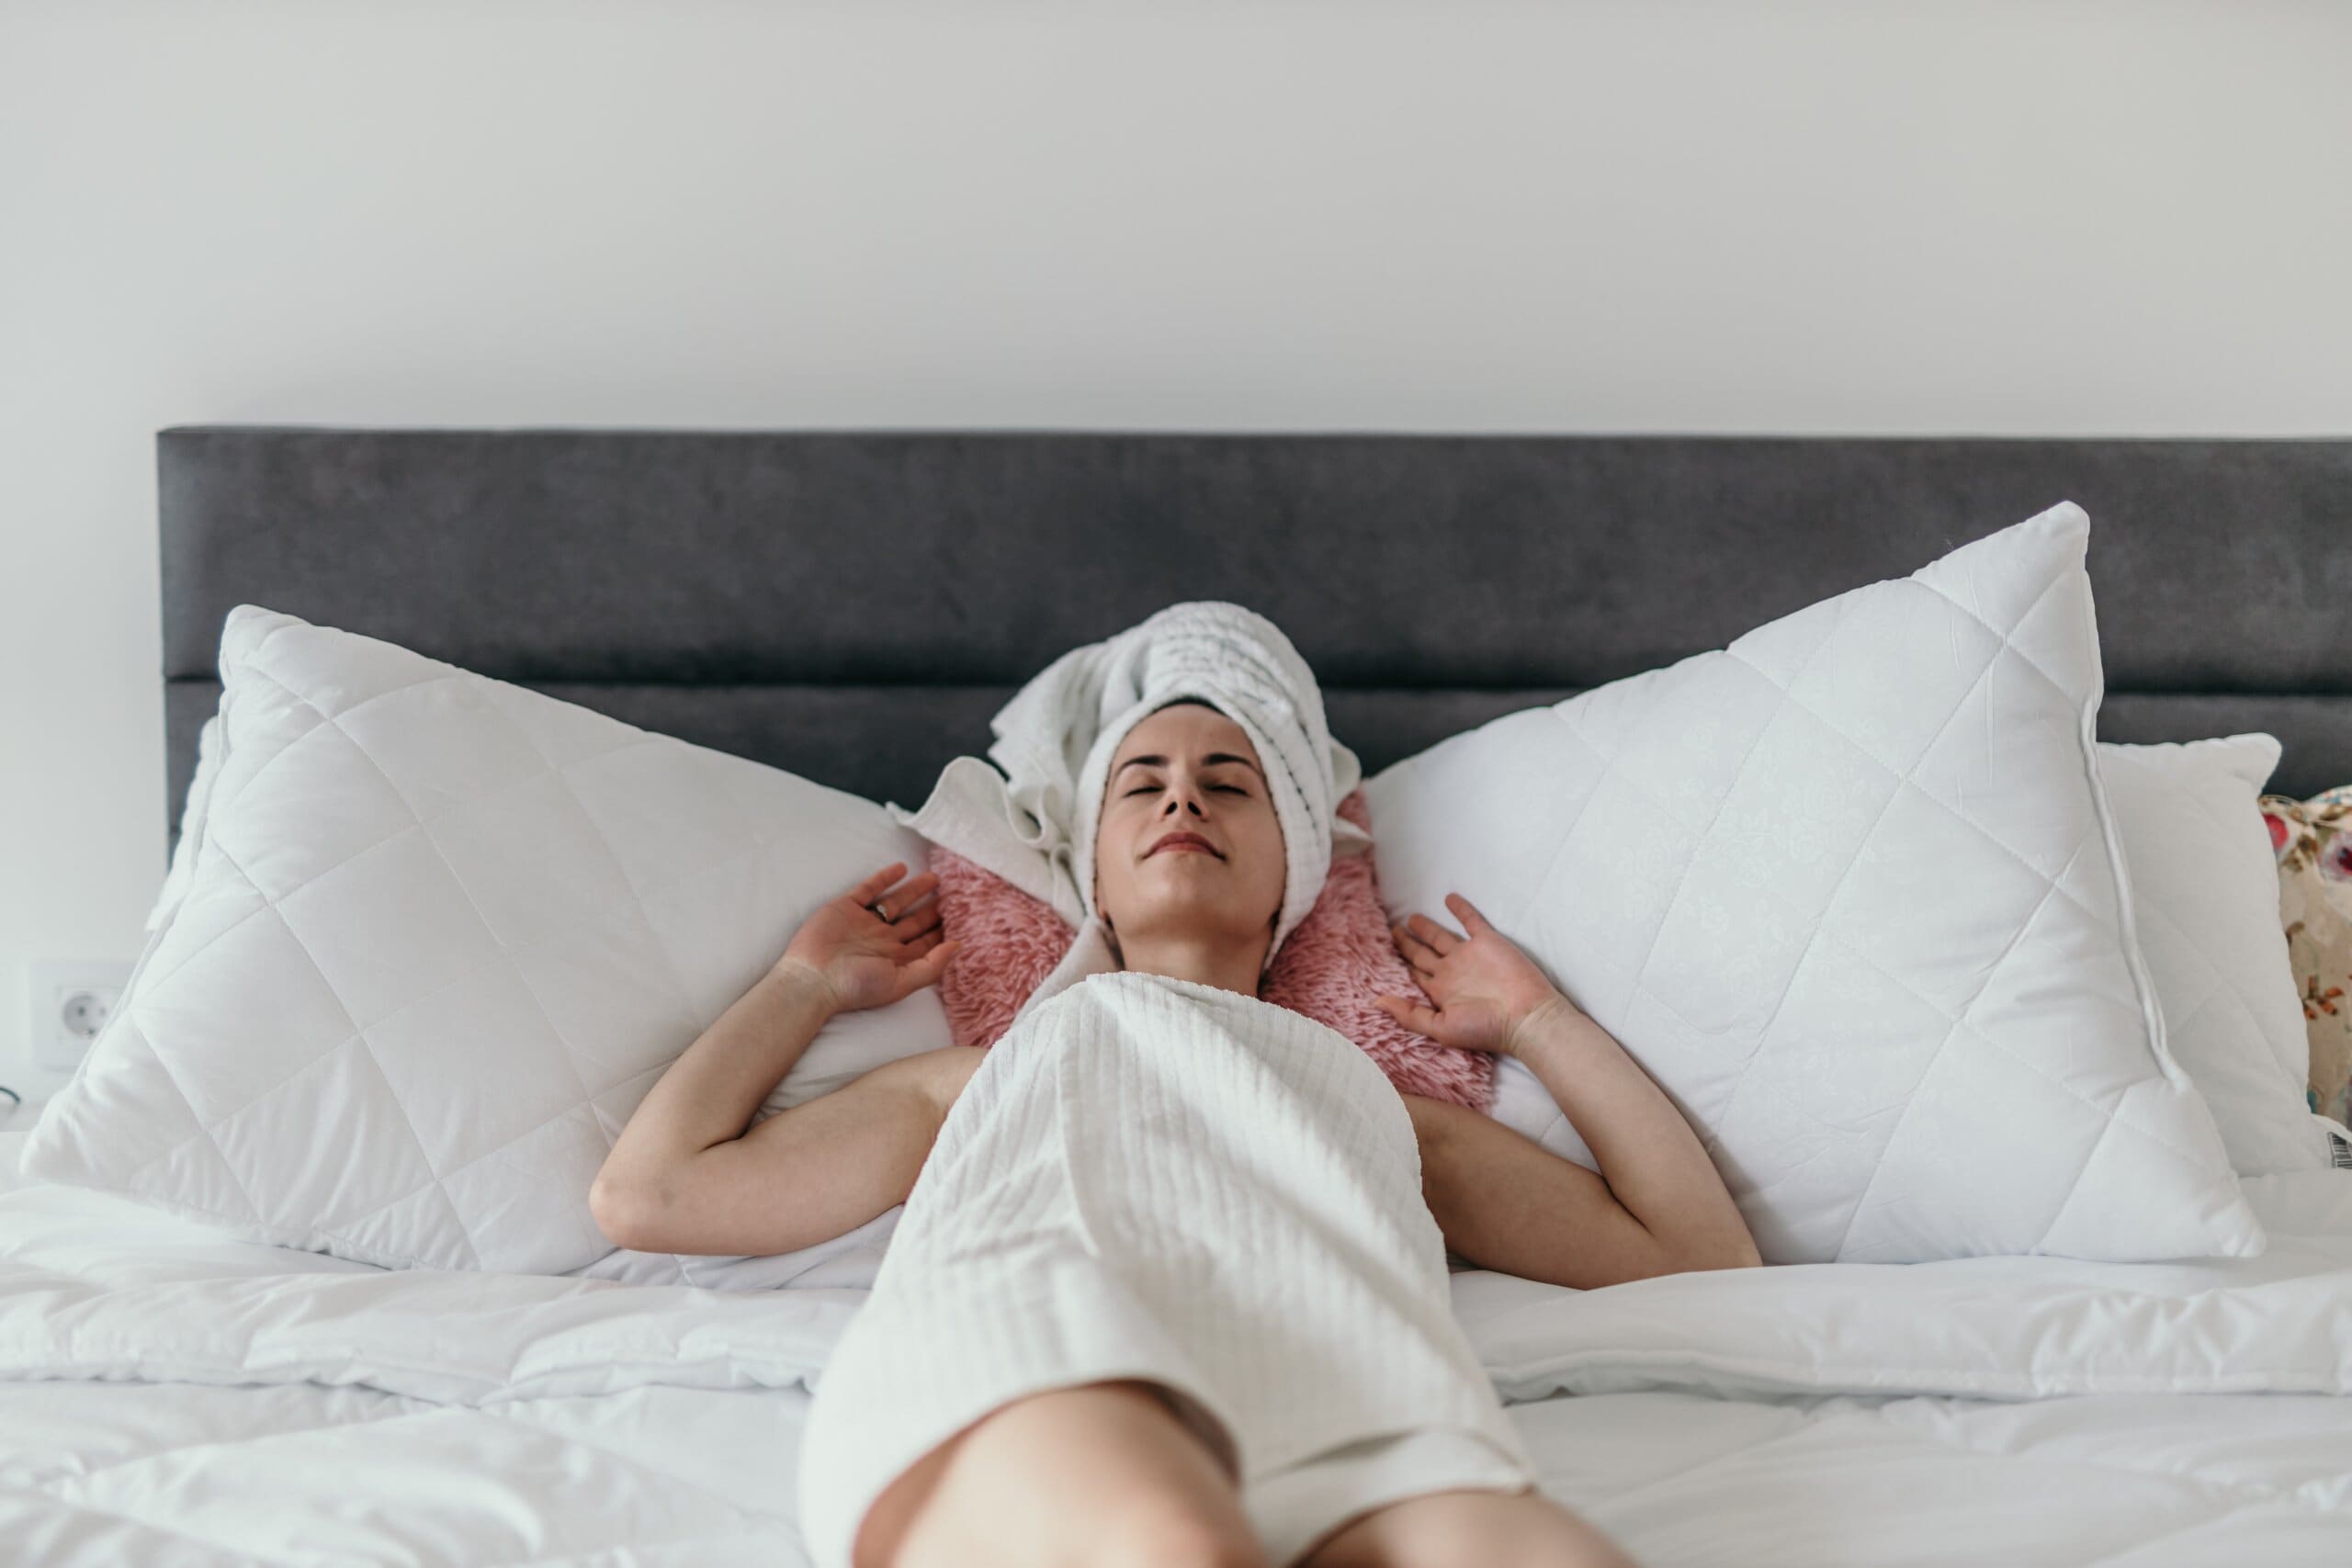 Woman resting on her bed in a towel, ready to sleep without anxiety.